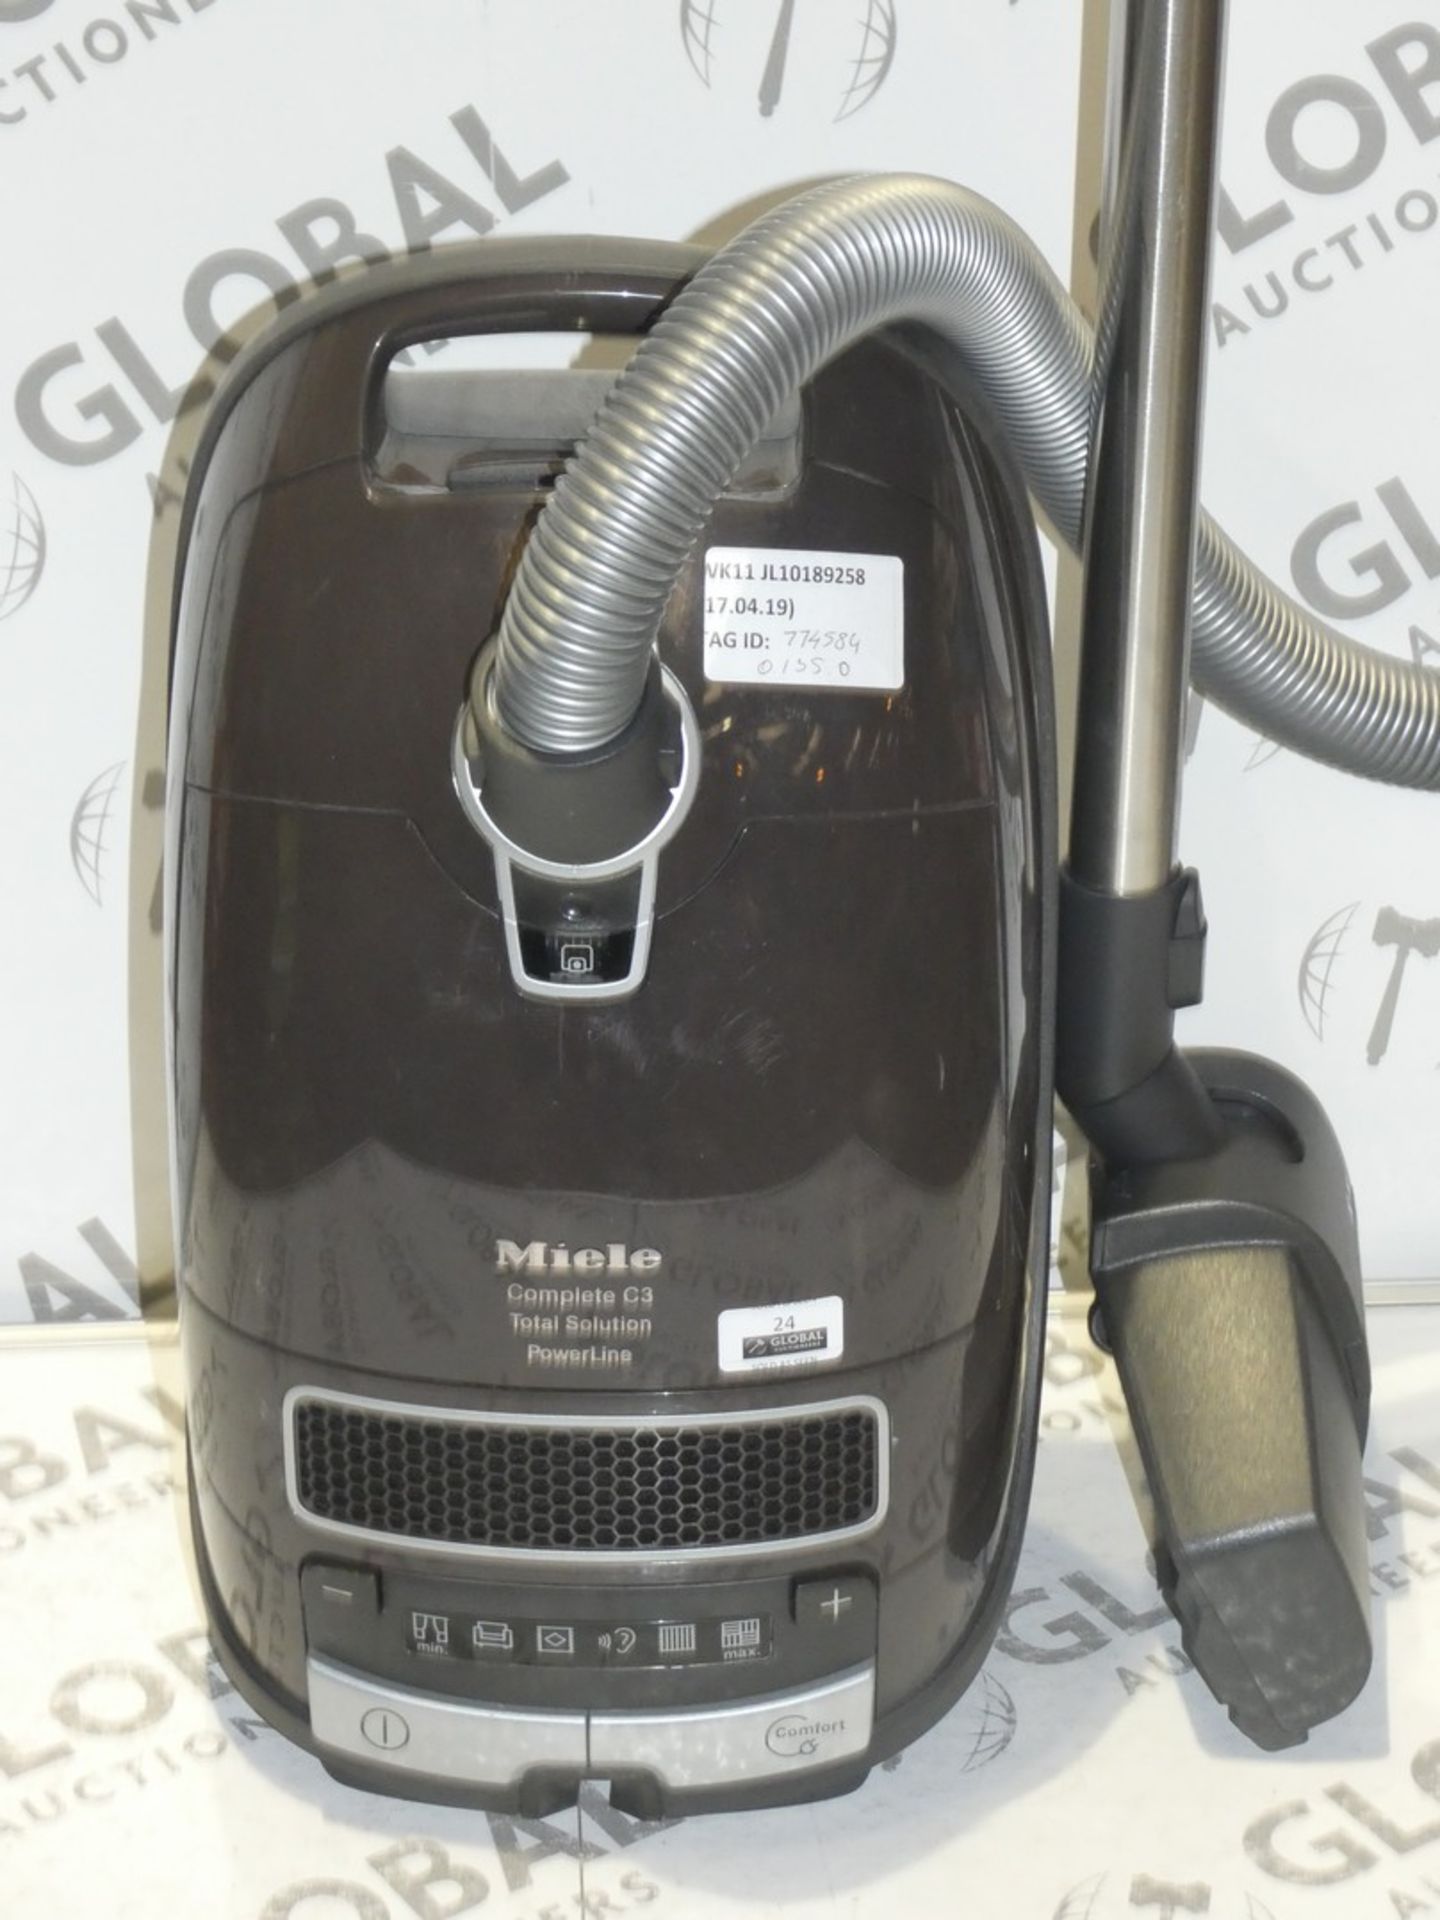 Miele Complete C3 Total Solution Powerline Cylinder Vacuum Cleaner (774854)RRP £135